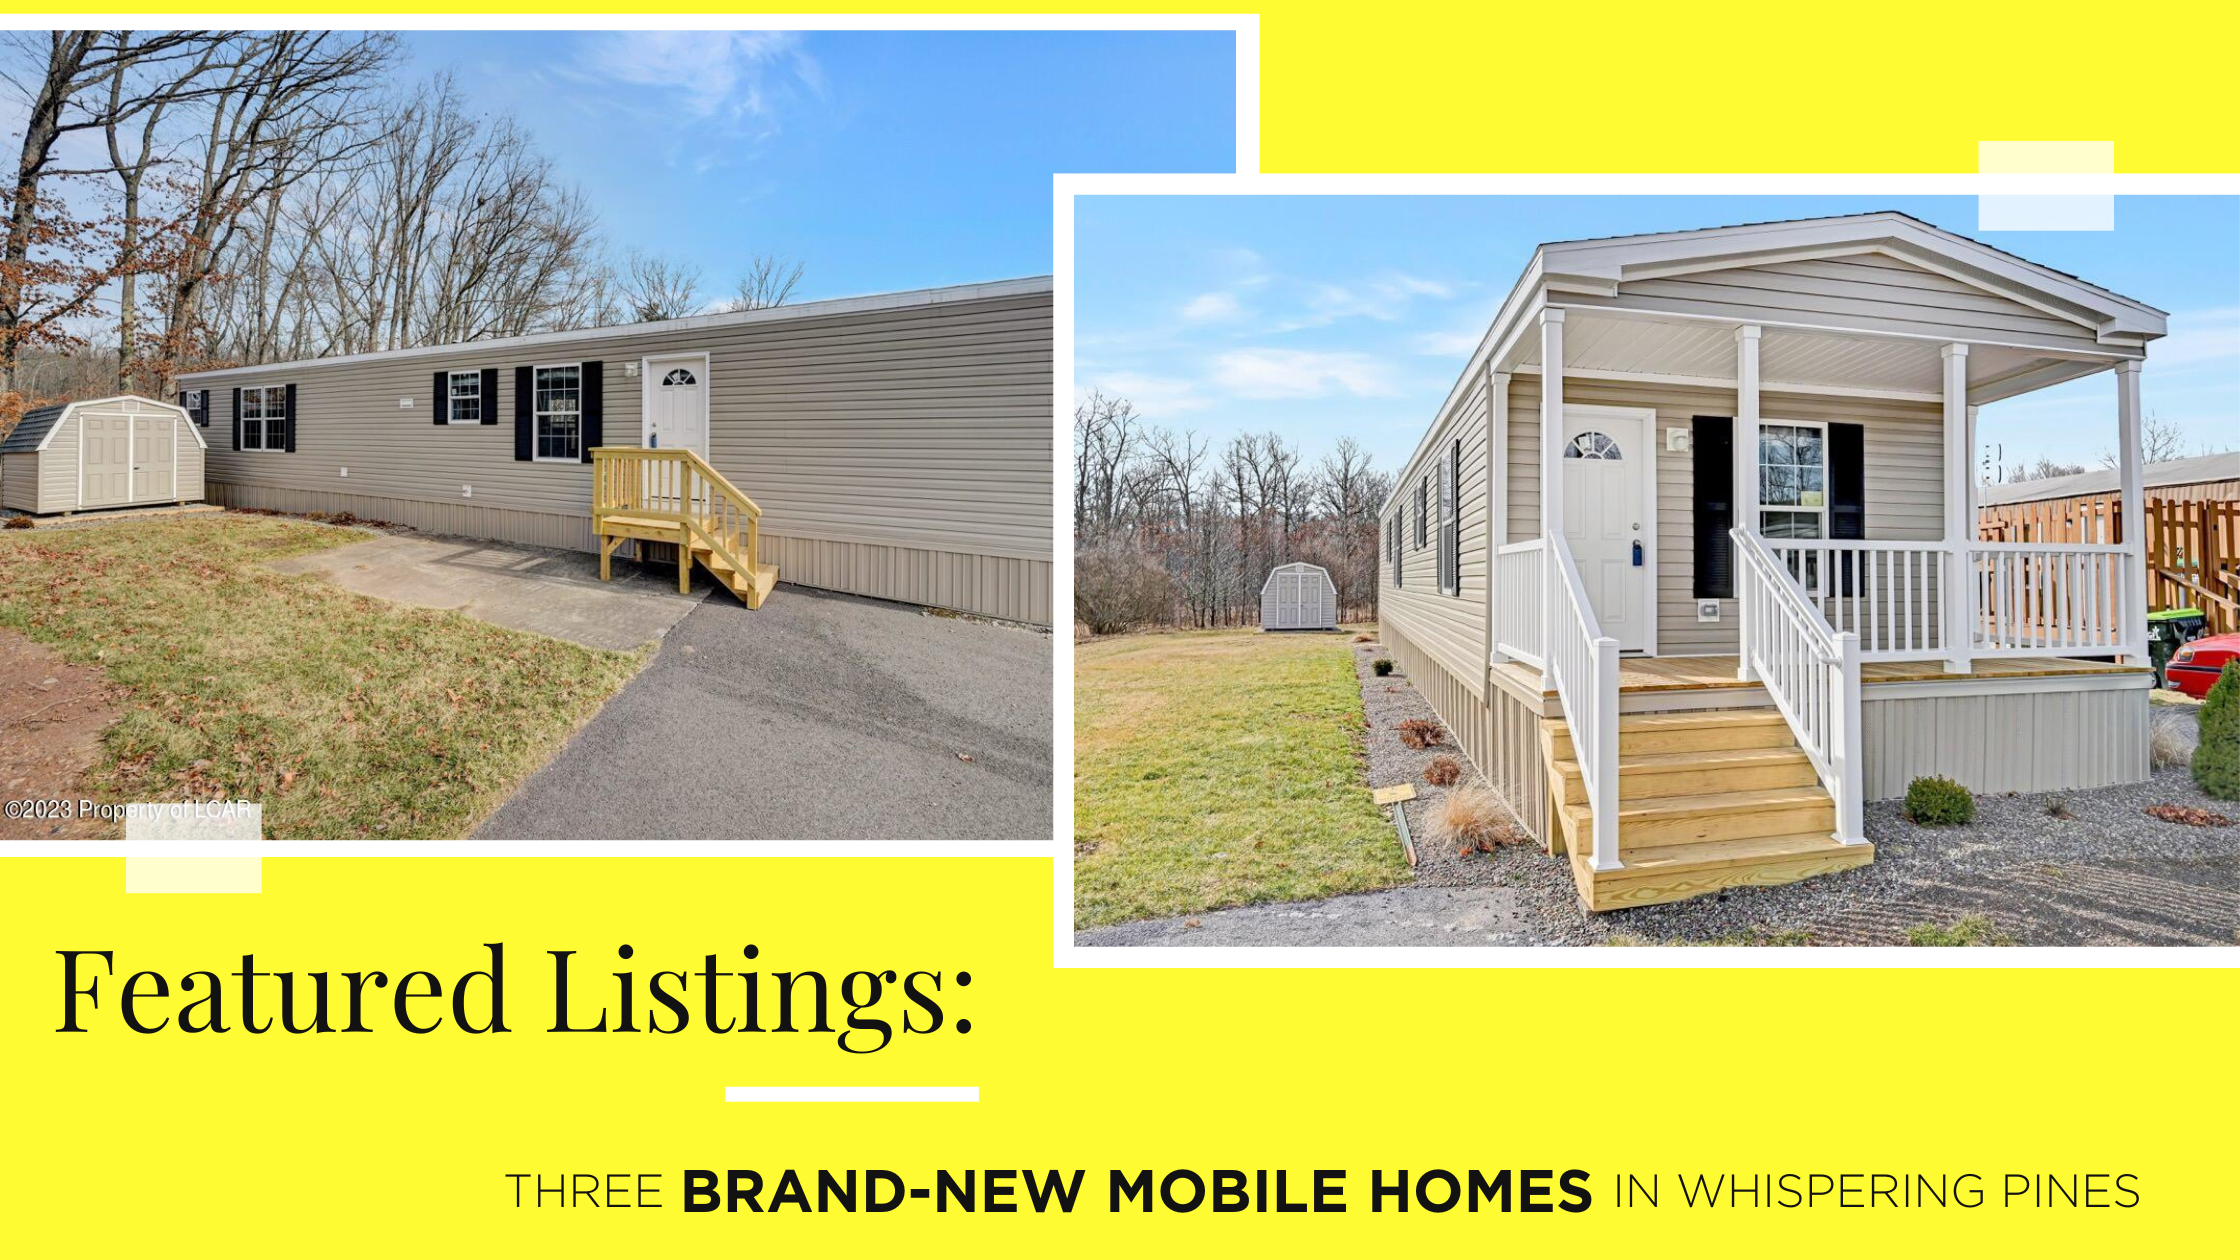 Lewith & Freeman Featured Listings: Three Brand-New Mobile Homes in Whispering Pines